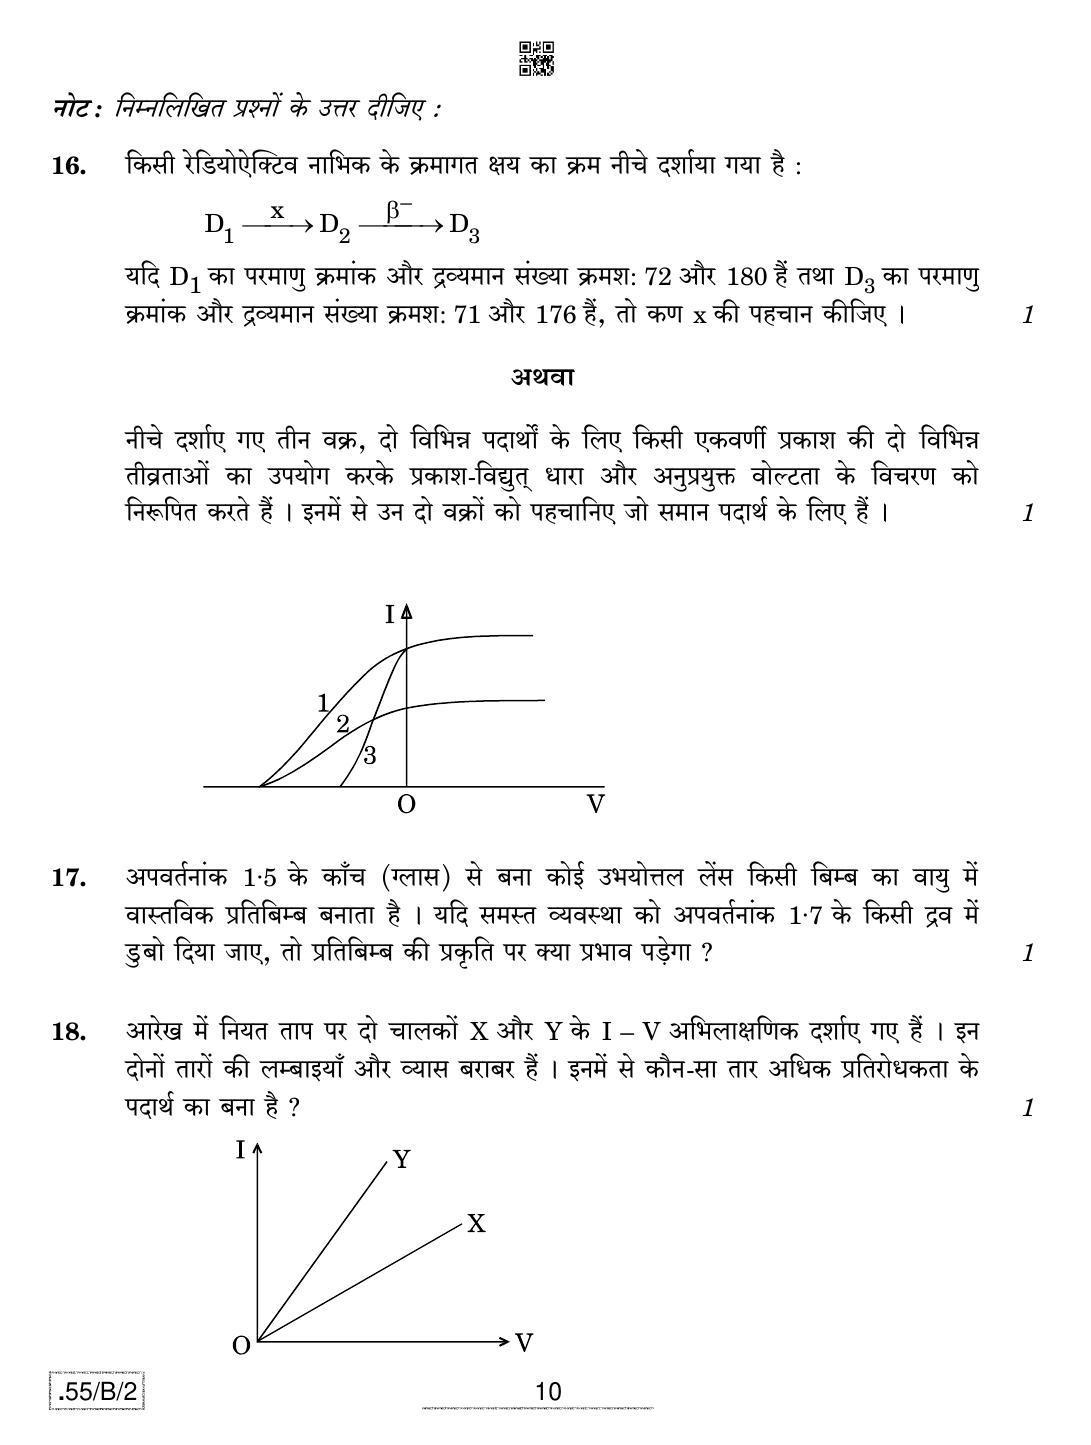 CBSE Class 12 55-C-2 - Physics 2020 Compartment Question Paper - Page 10